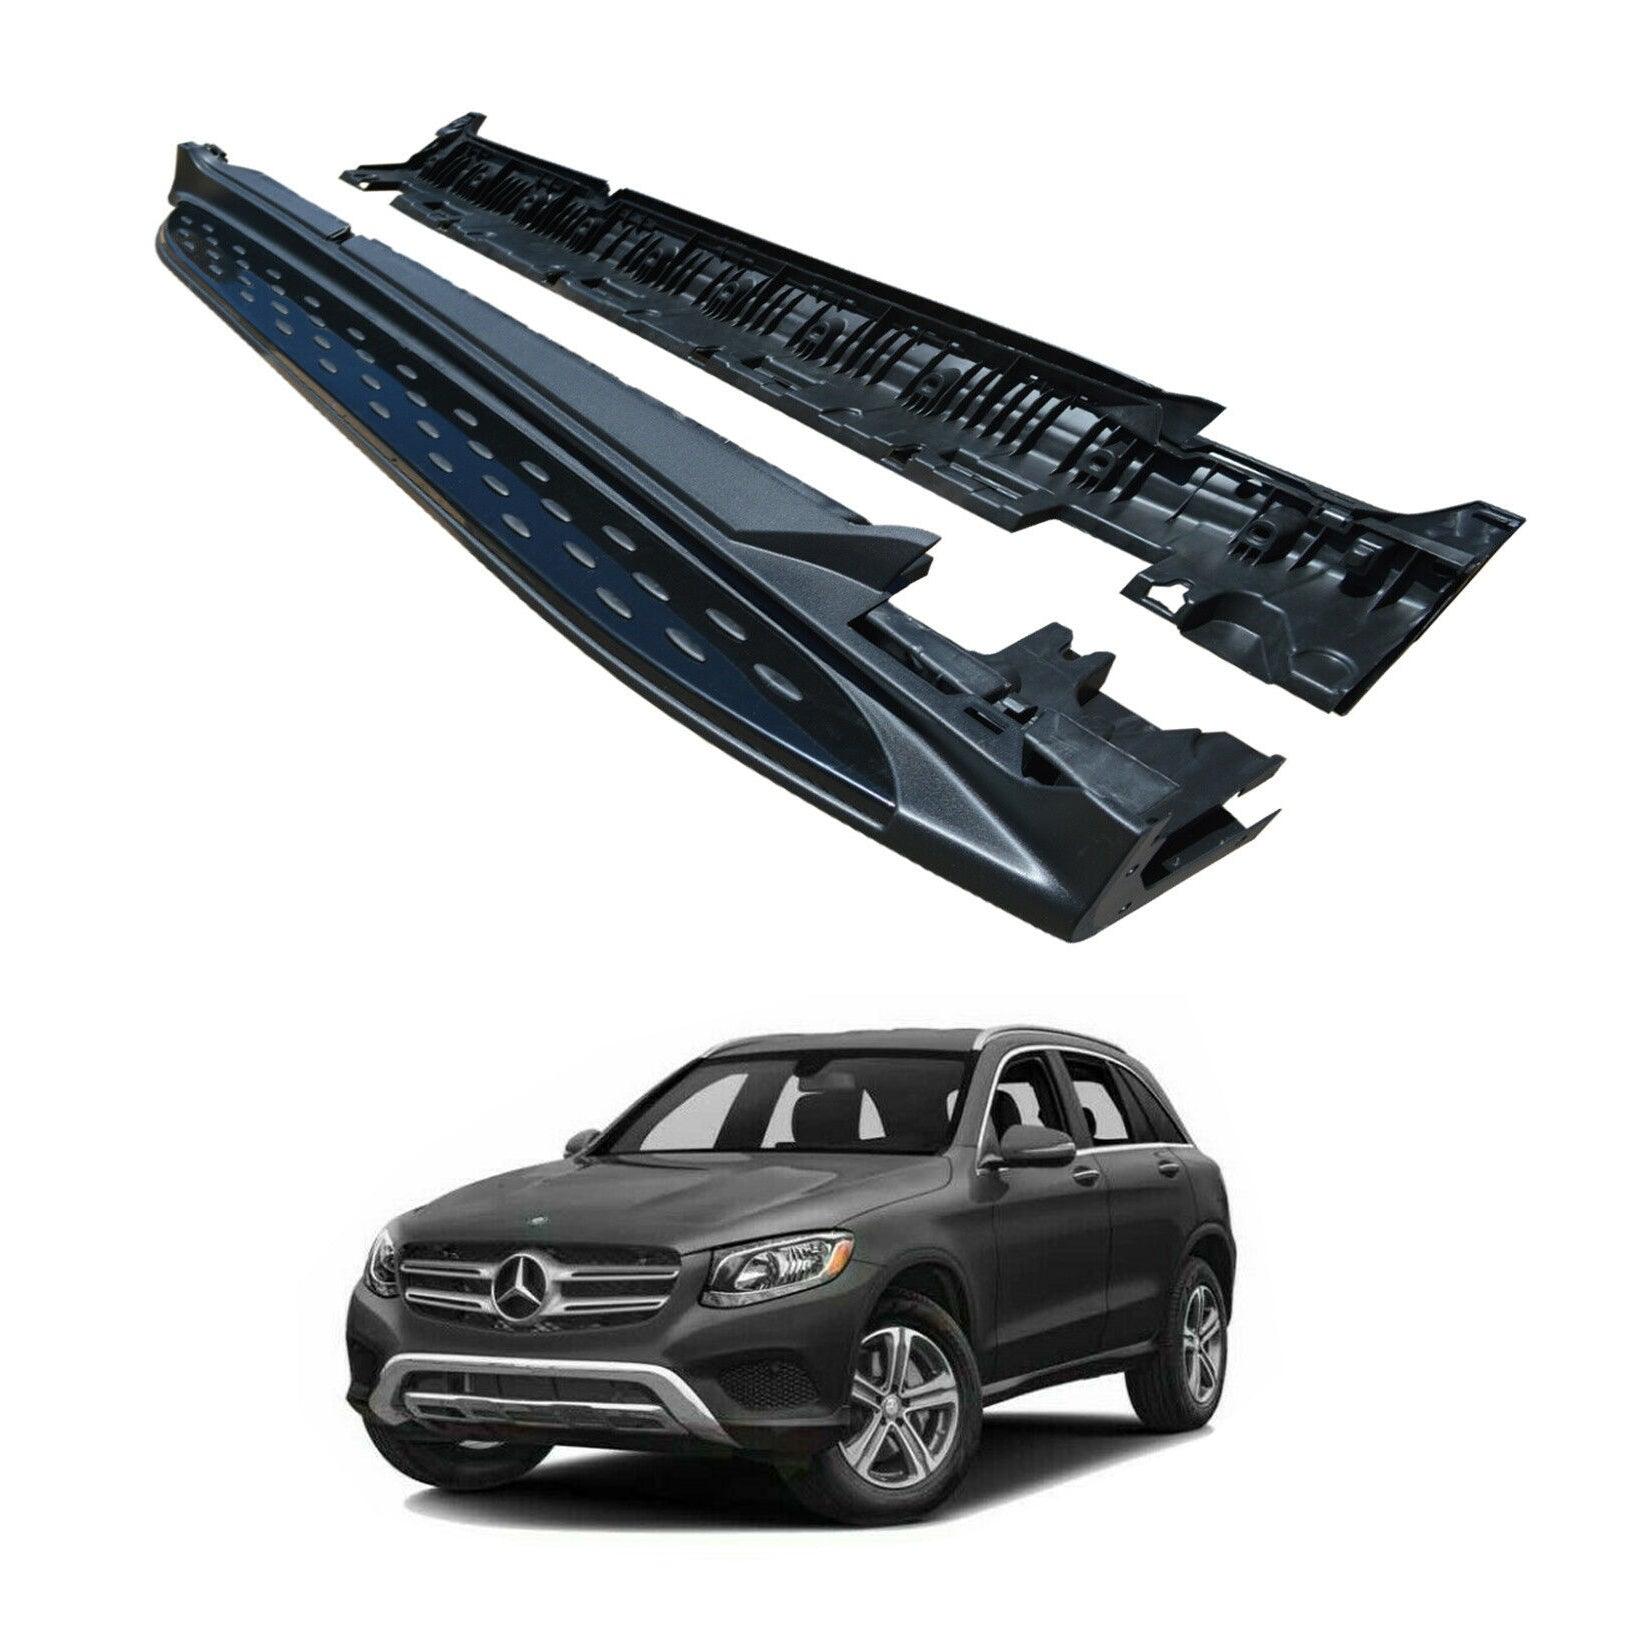 MERCEDES GLC X253 2015 ON OE STYLE INTEGRATED SIDE STEPS RUNNING BOARDS – GLOSS BLACK EDITION - RisperStyling